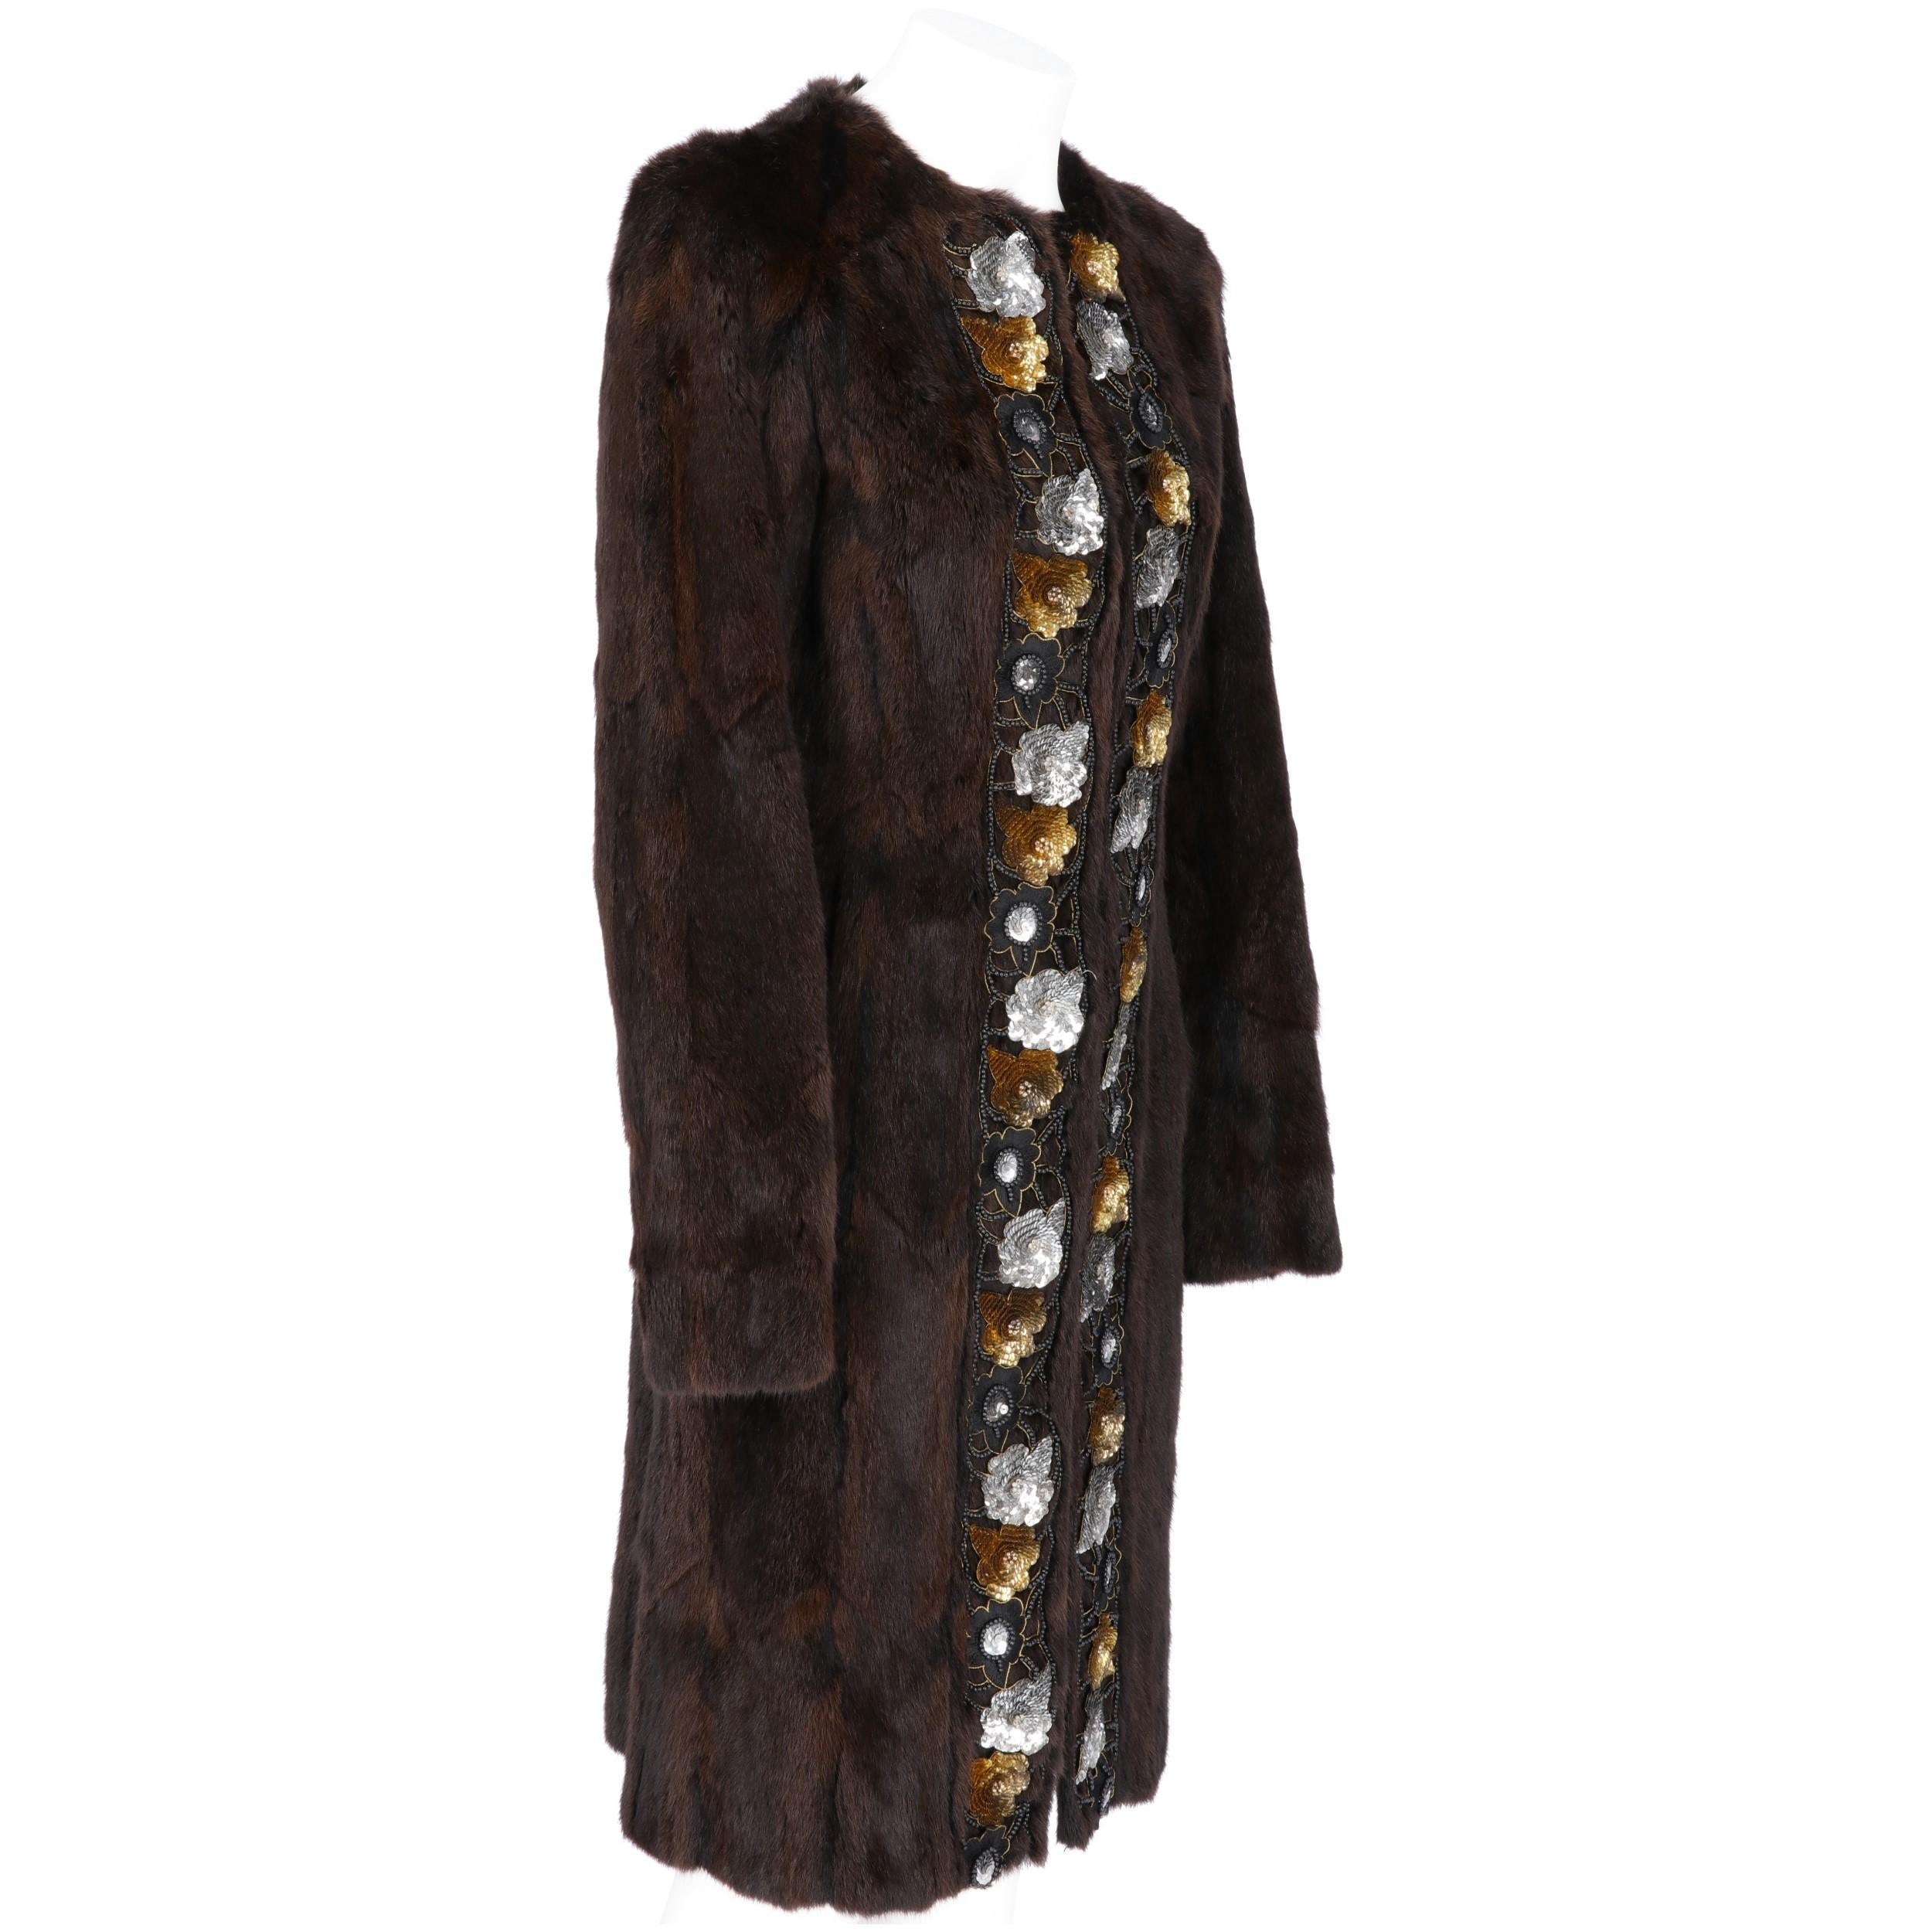 Miu Miu round neck long soft hamster fur coat dyed in brown color, with long sleeves, hooks and eyes fastening, frontal hidden pockets, shiny sequins and beads floral embroidery and unlined interior.

Please note this item cannot be shipped outside